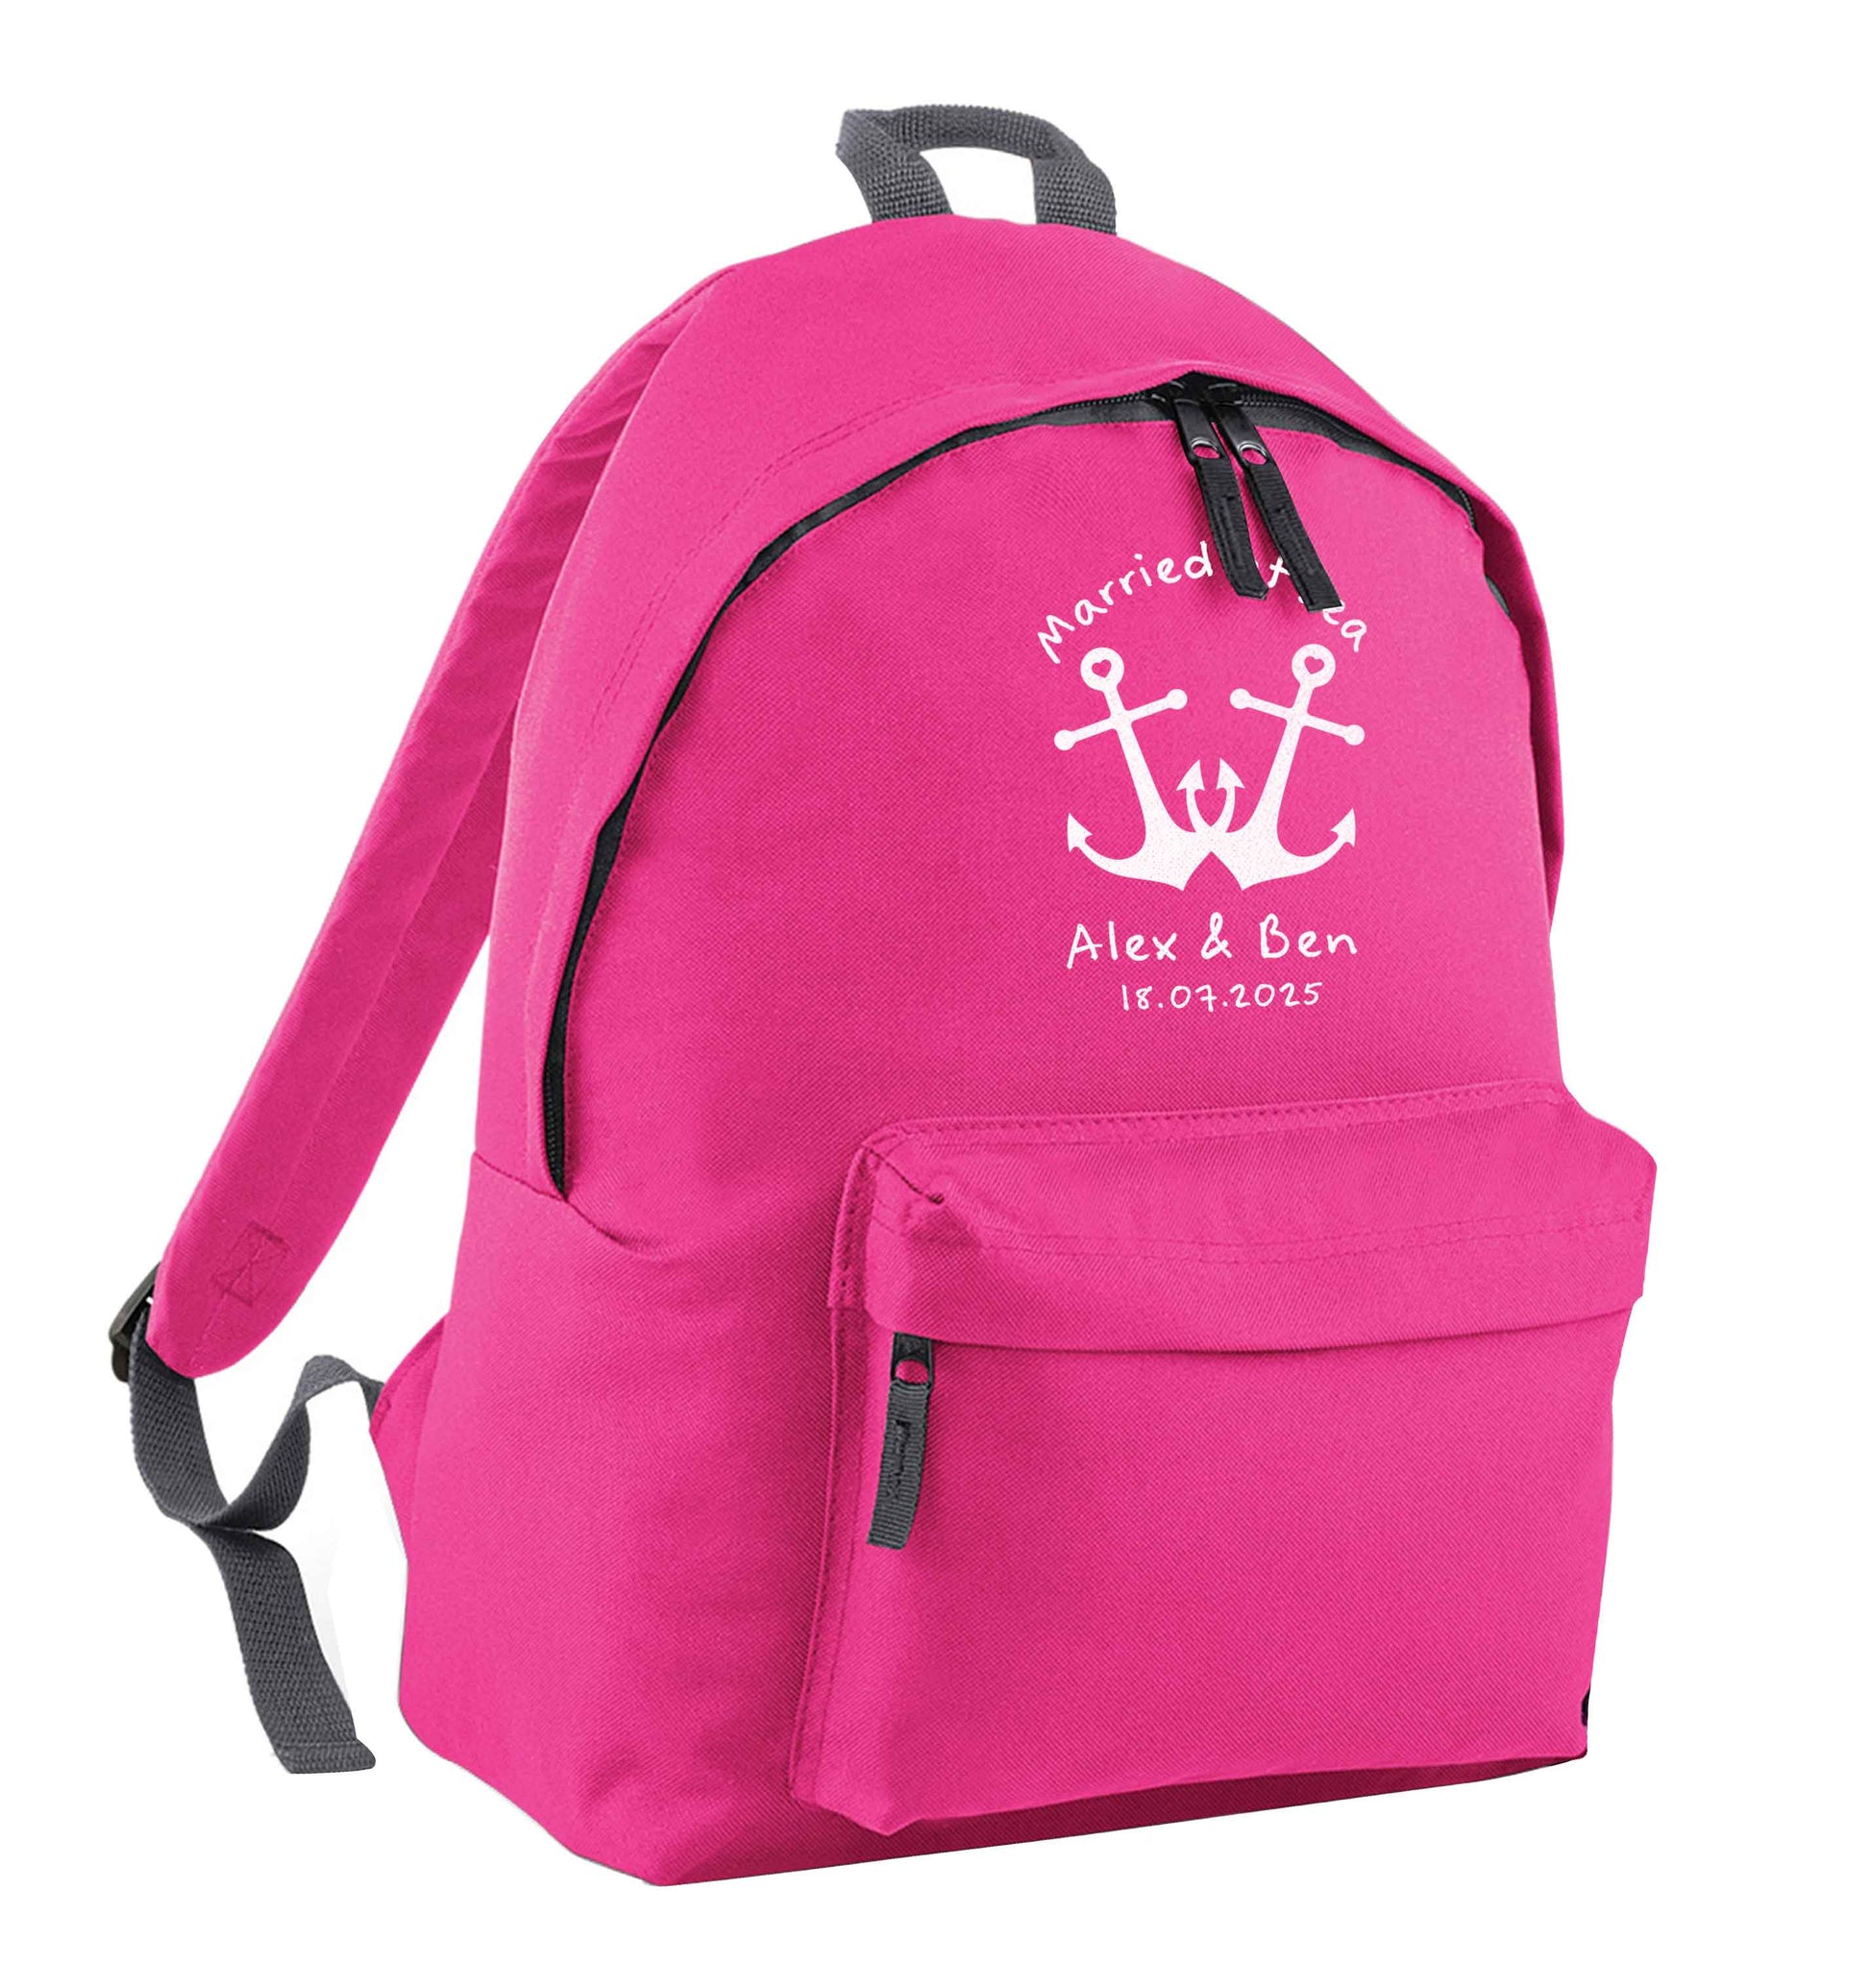 Married at sea blue anchors pink adults backpack